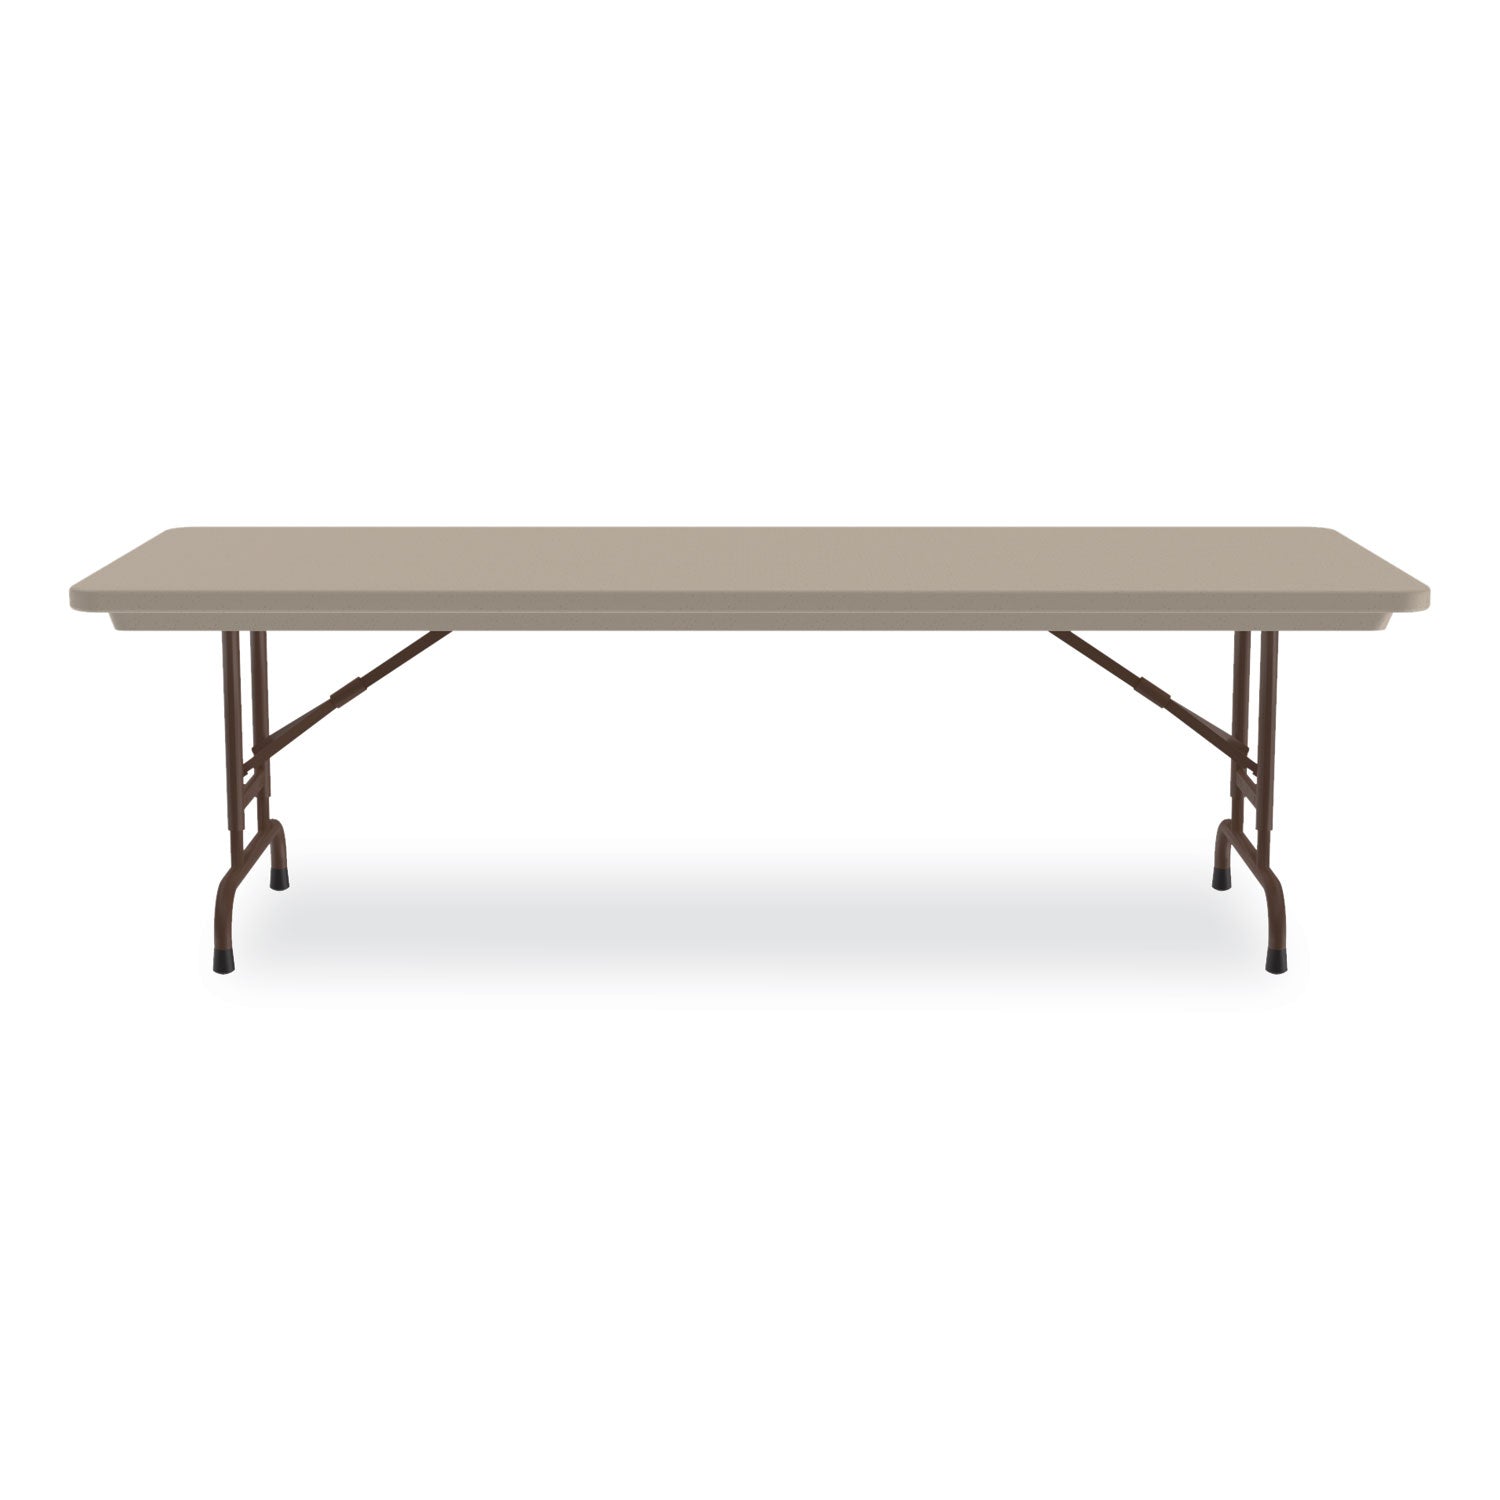 adjustable-folding-tables-rectangular-96-x-30-x-22-to-32-mocha-top-brown-legs-4-pallet-ships-in-4-6-business-days_crlra3096244p - 8